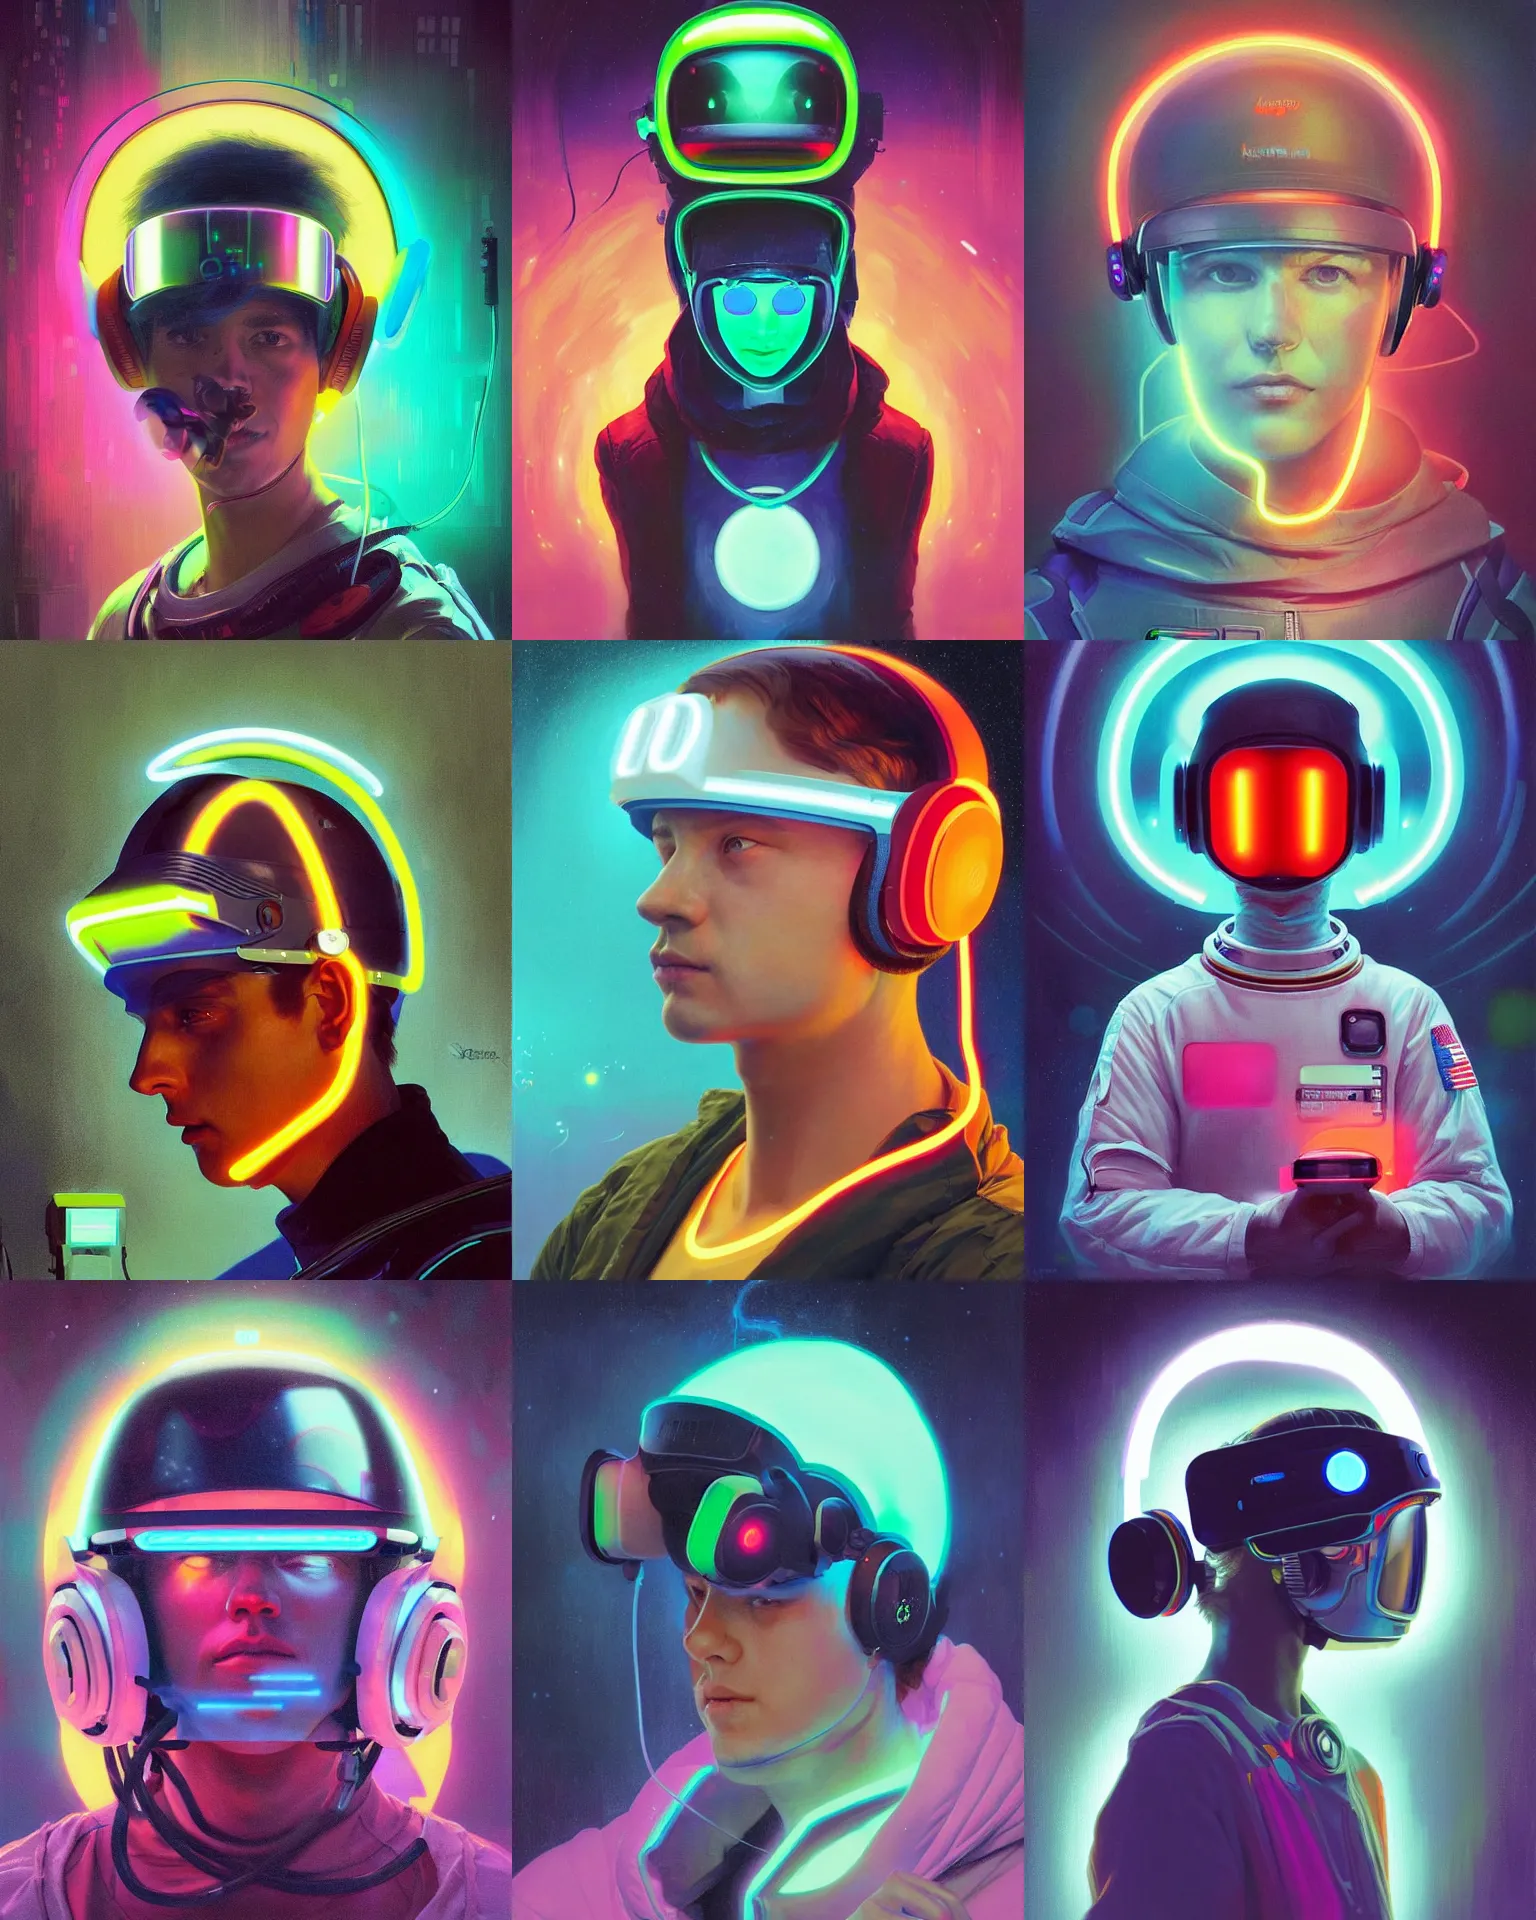 Prompt: future coder looking on, glowing visor over eyes and sleek neon headphones, neon accents, desaturated headshot portrait painting by dean cornwall, ilya repin, rhads, tom whalen, alex grey, alphonse mucha, astronaut cyberpunk electric fashion photography